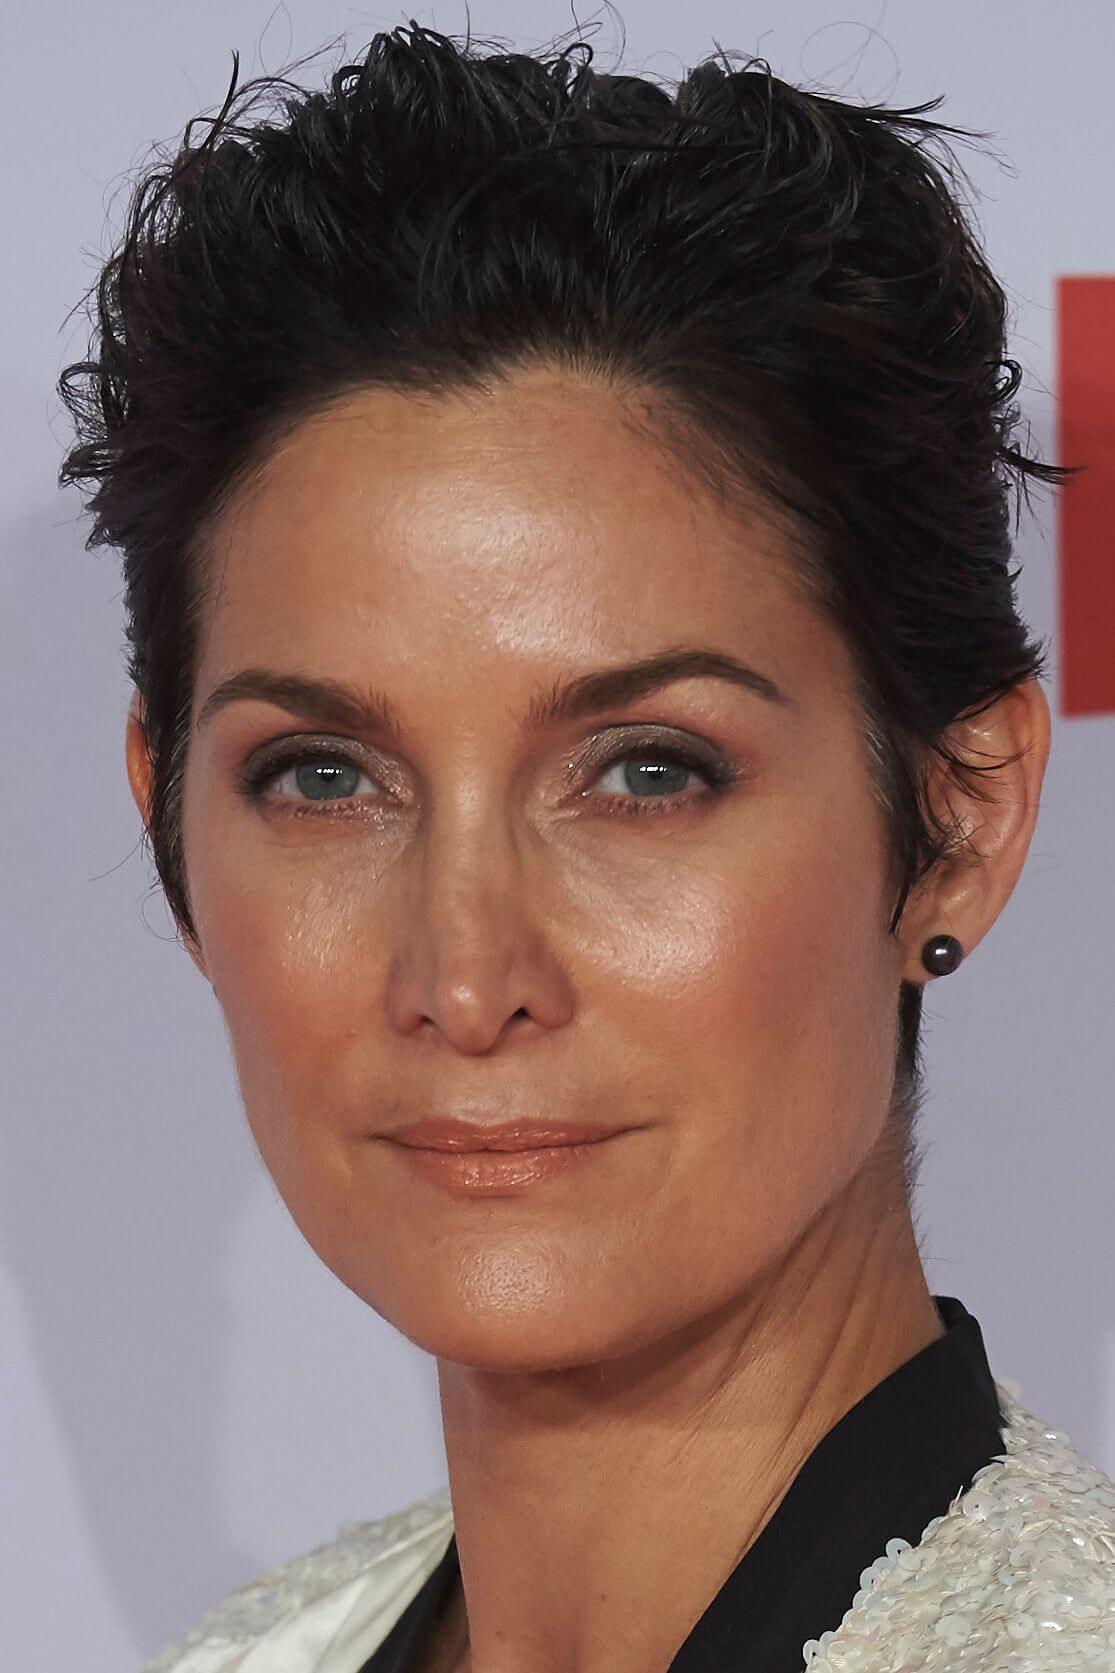 70+ Hot Pictures Of Carrie Anne Moss Will Drive You Nuts For Her 528